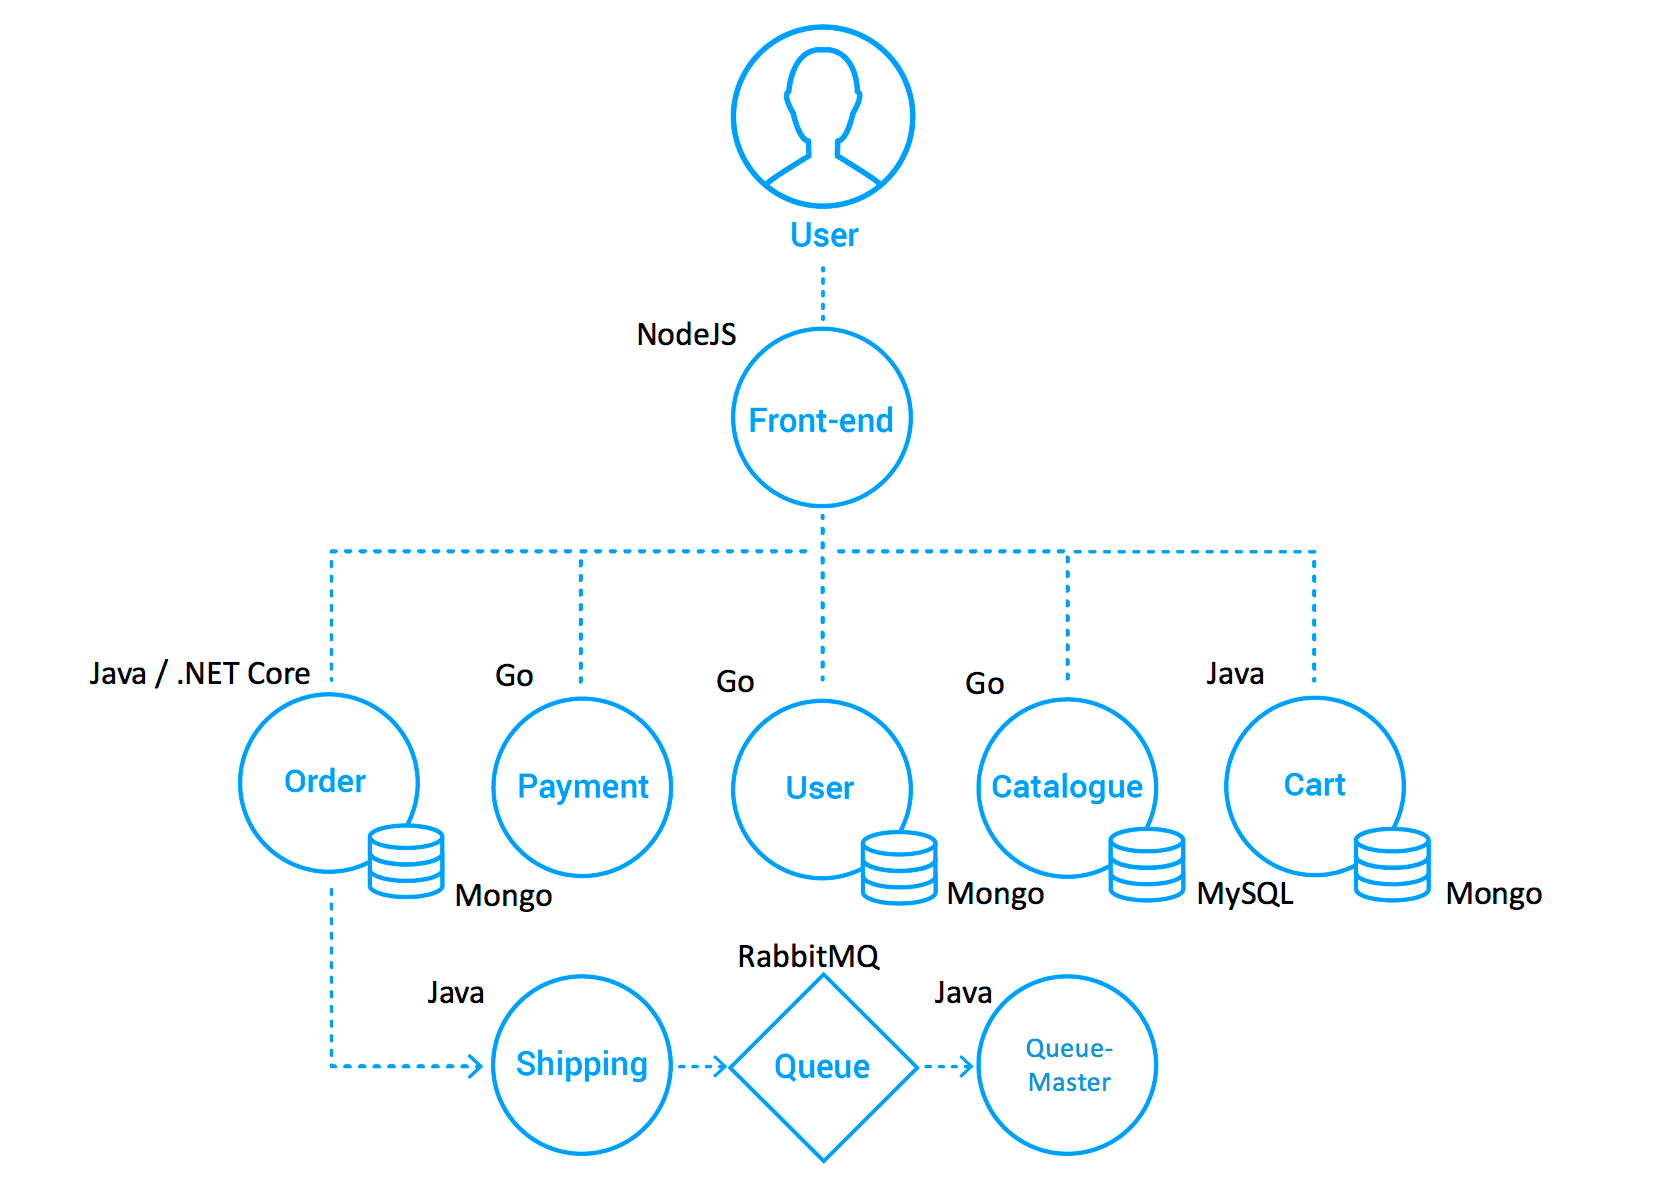 The architecture of sock shop project, consisting of 8 front-end and back-end microservices